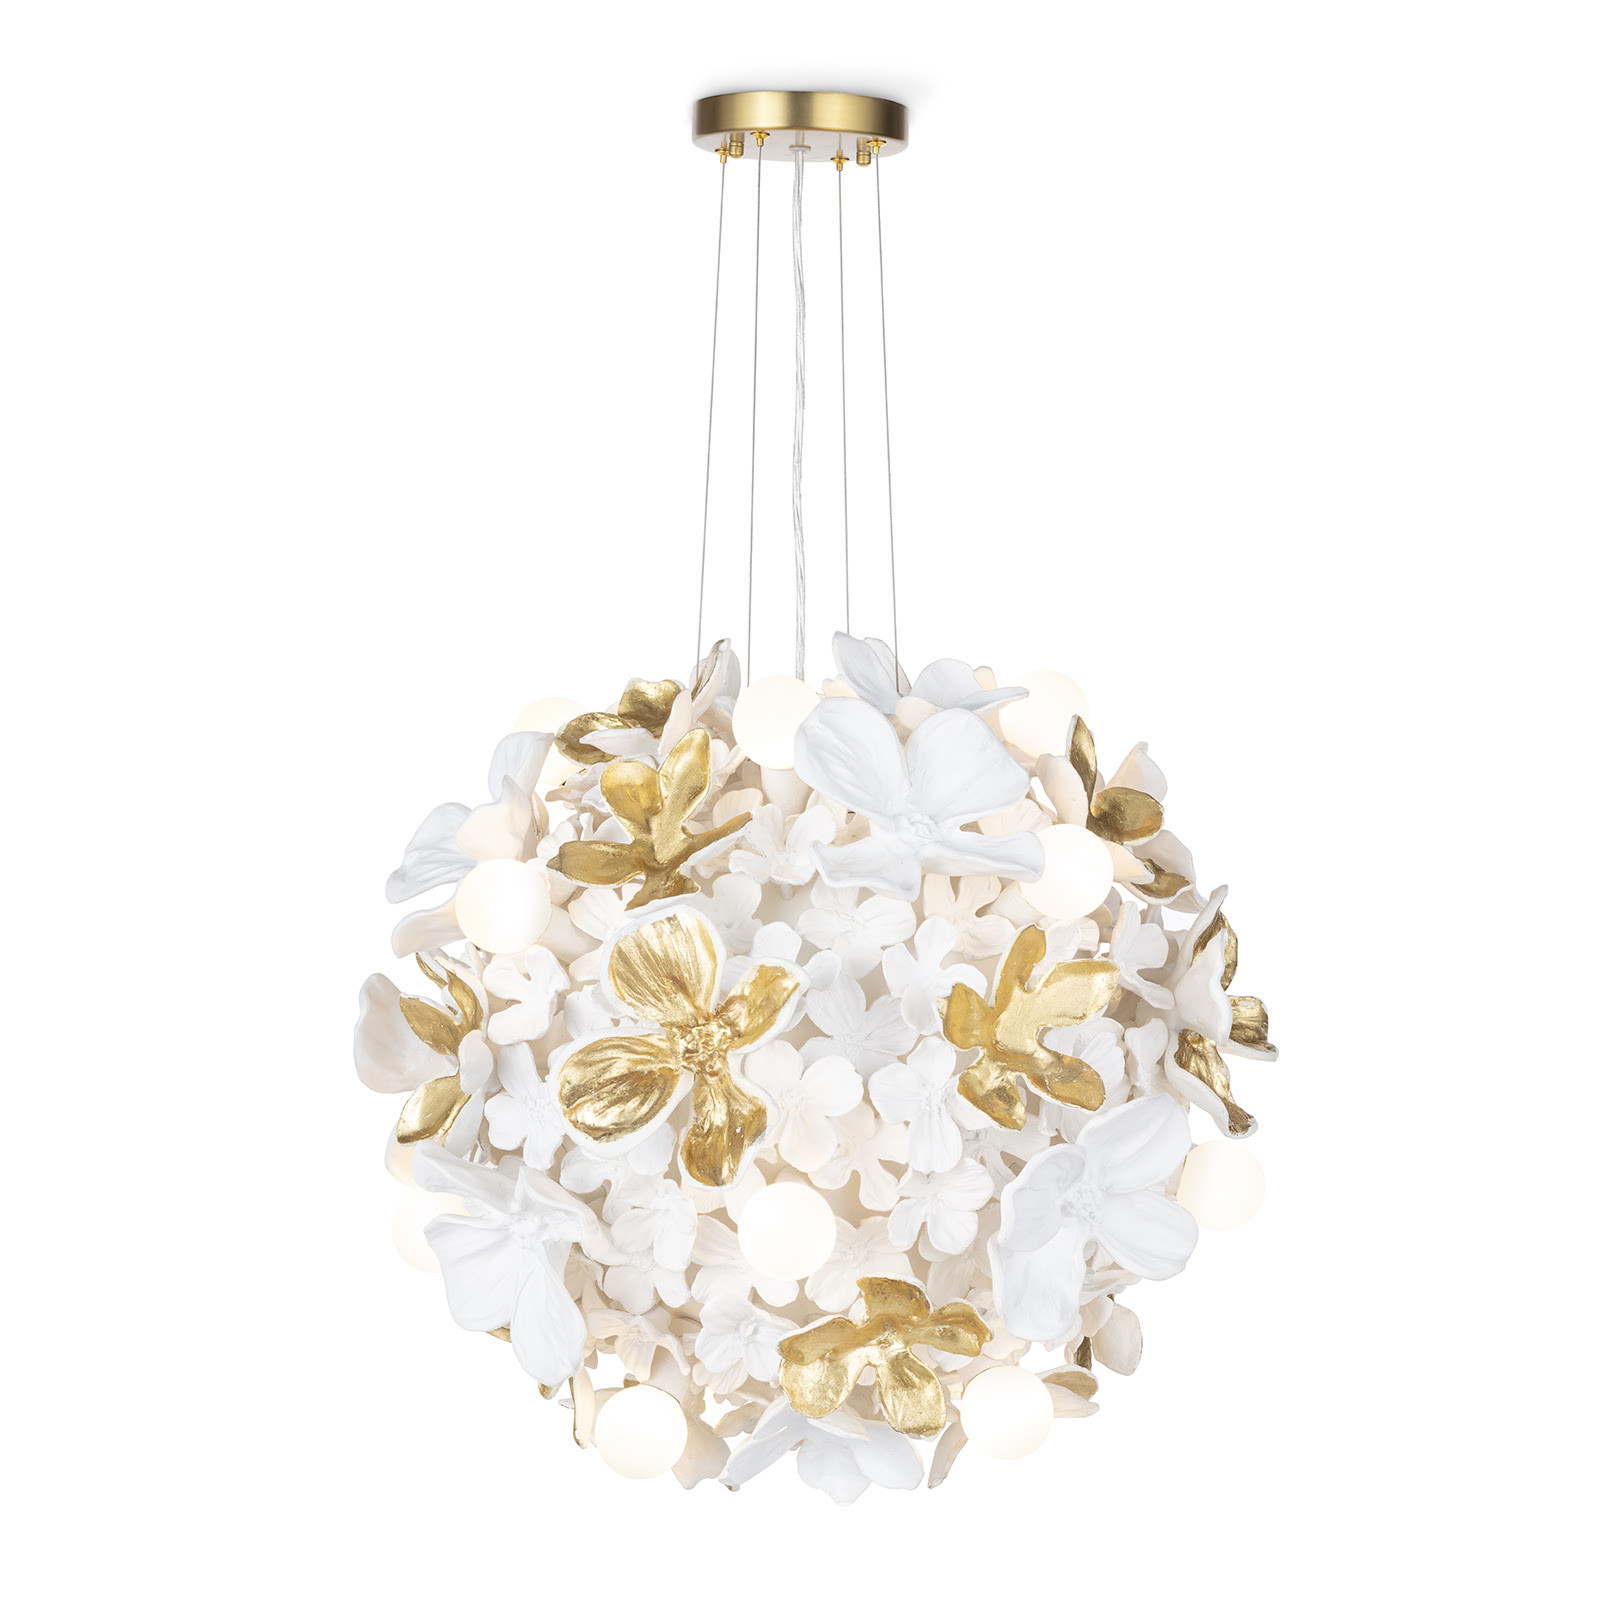 Golden ornature chandelier with cast flowers and leaves